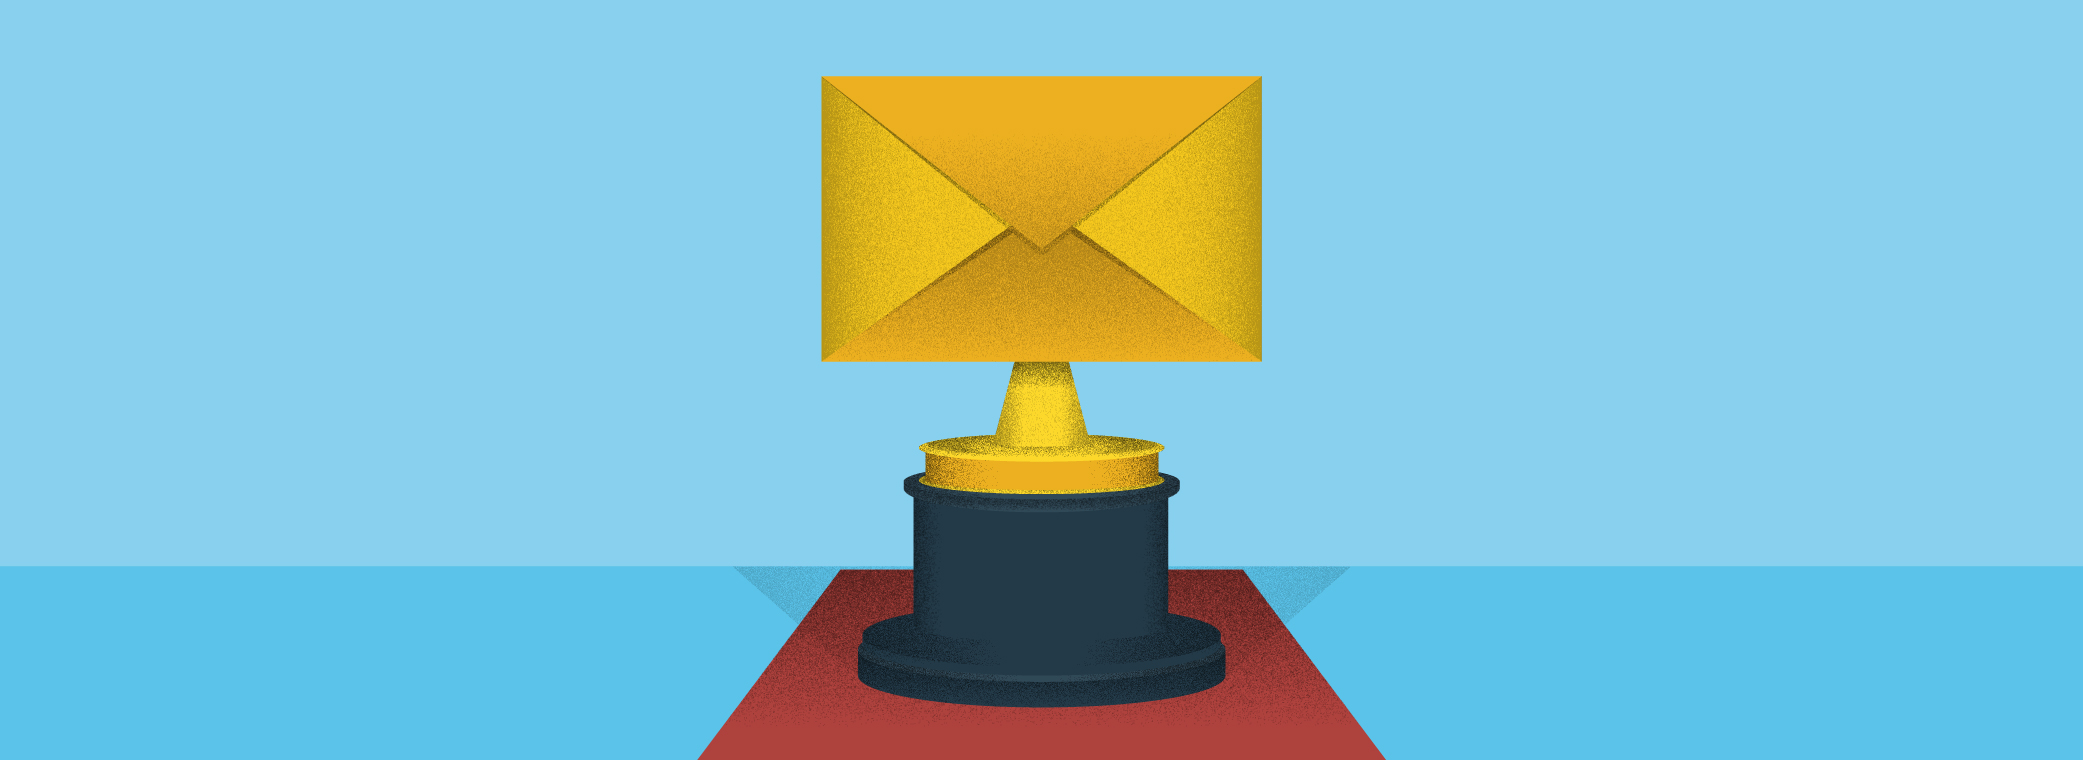 4 ways to win at email marketing